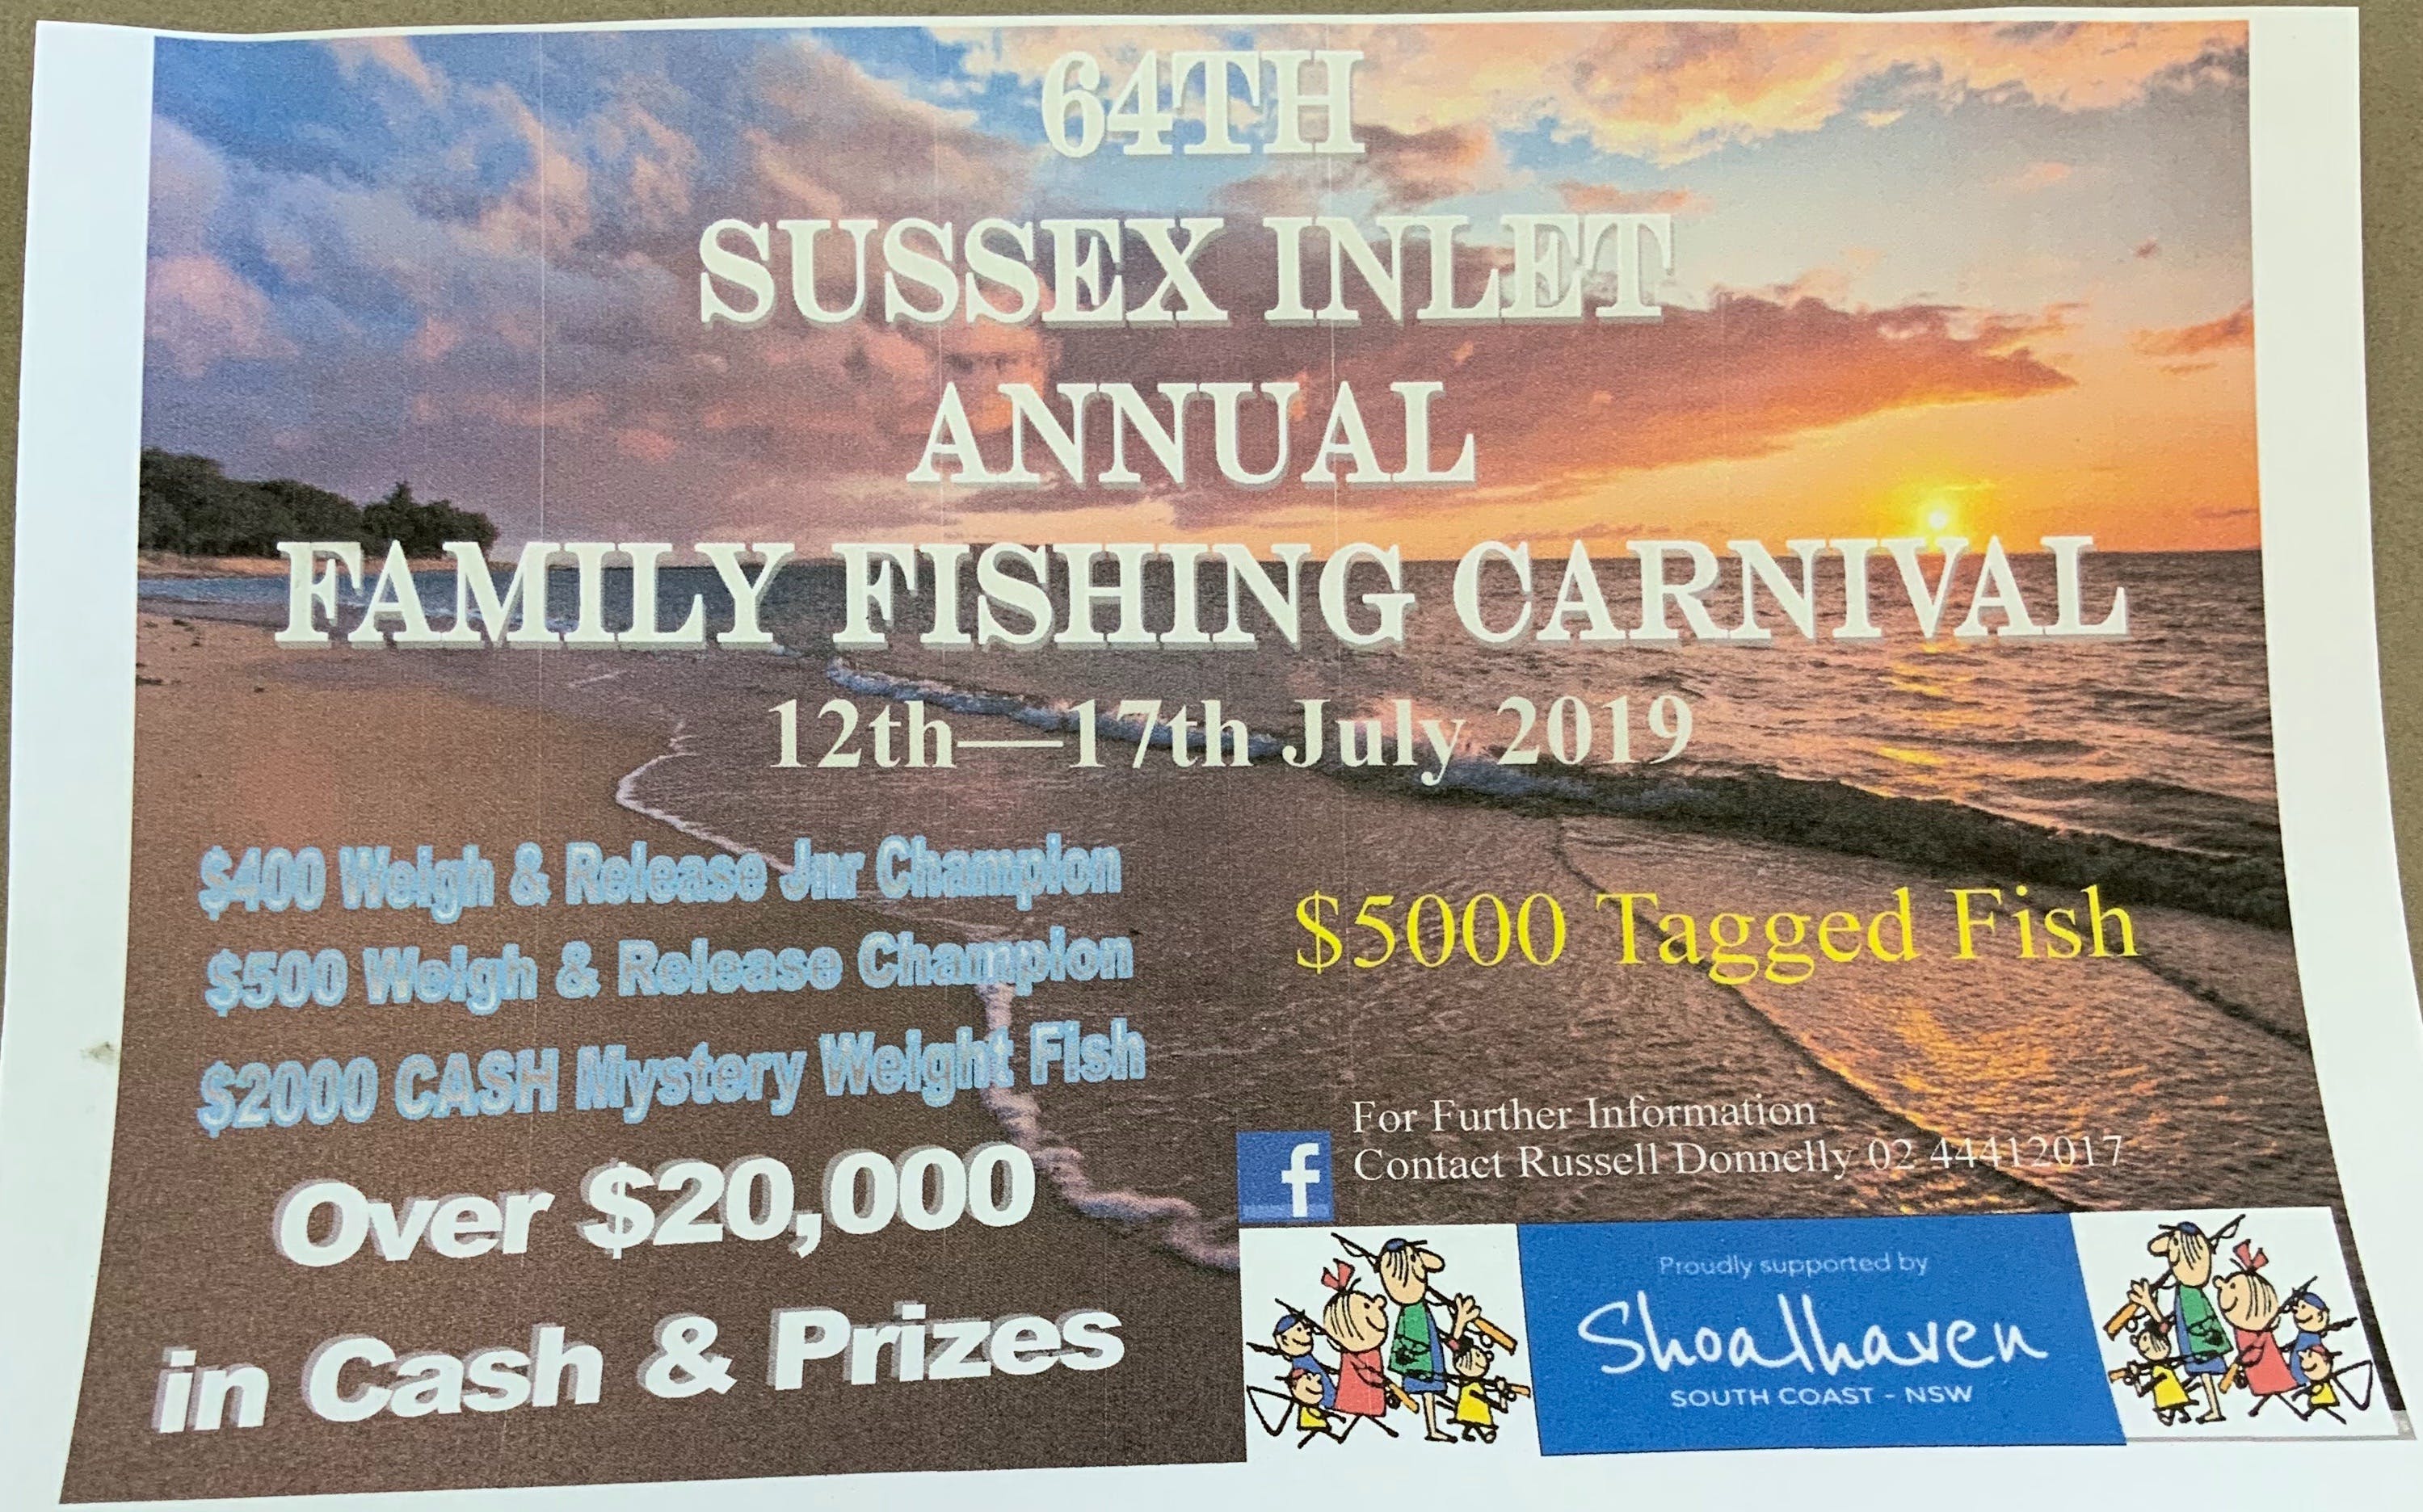 The Sussex Inlet Annual Family Fishing Carnival - St Kilda Accommodation